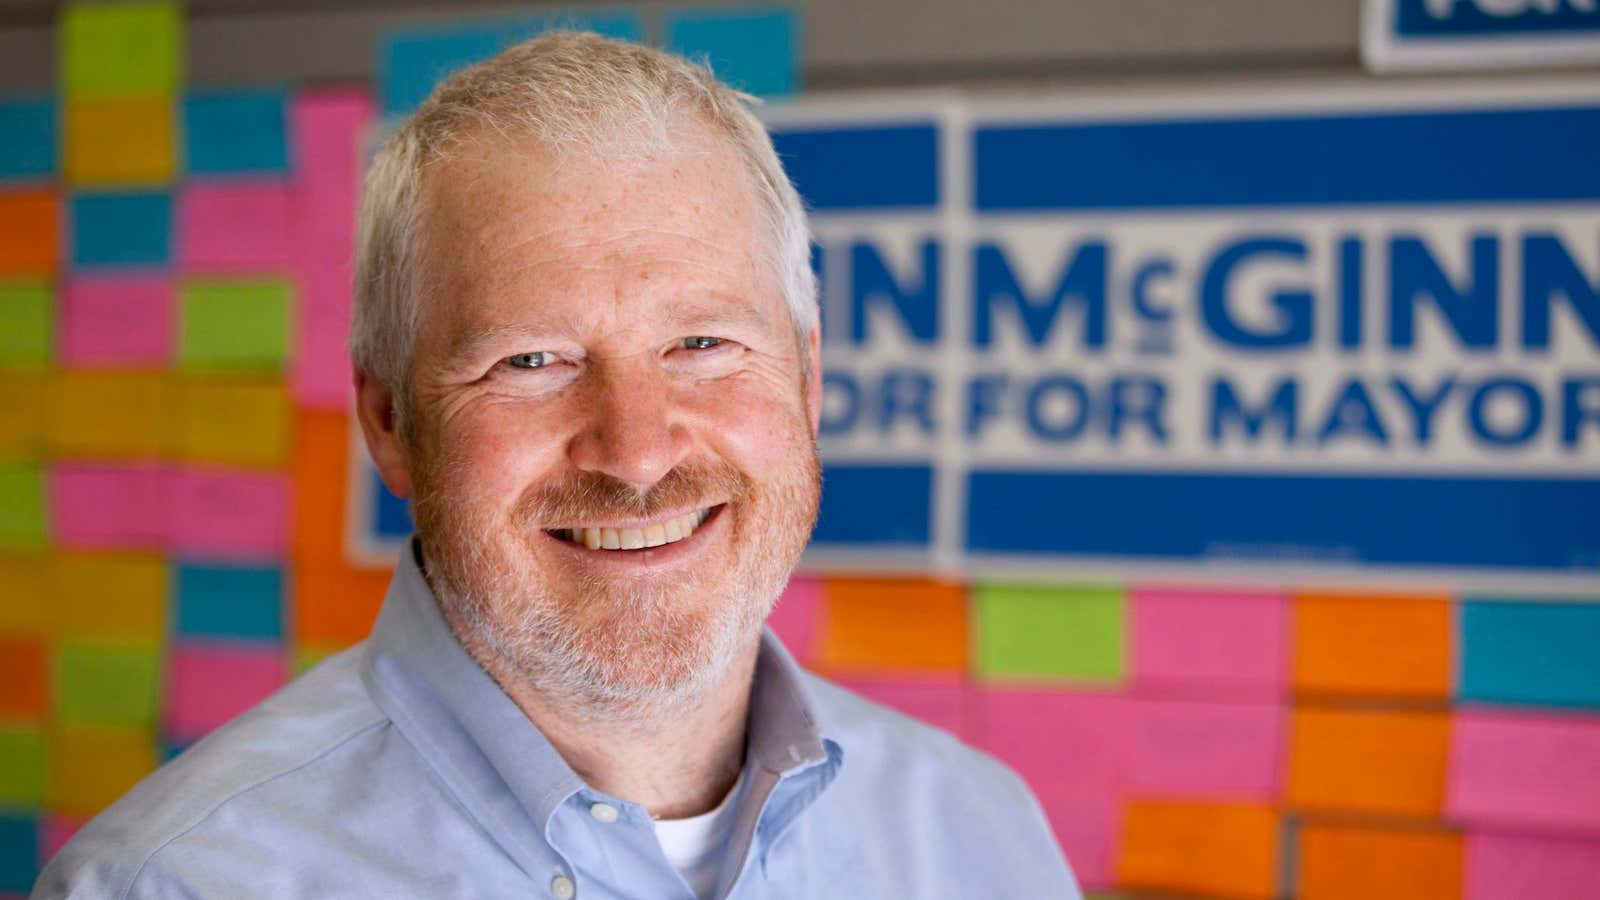 Comcast wants to wipe the smile off Seattle mayor Mike McGinn’s face.